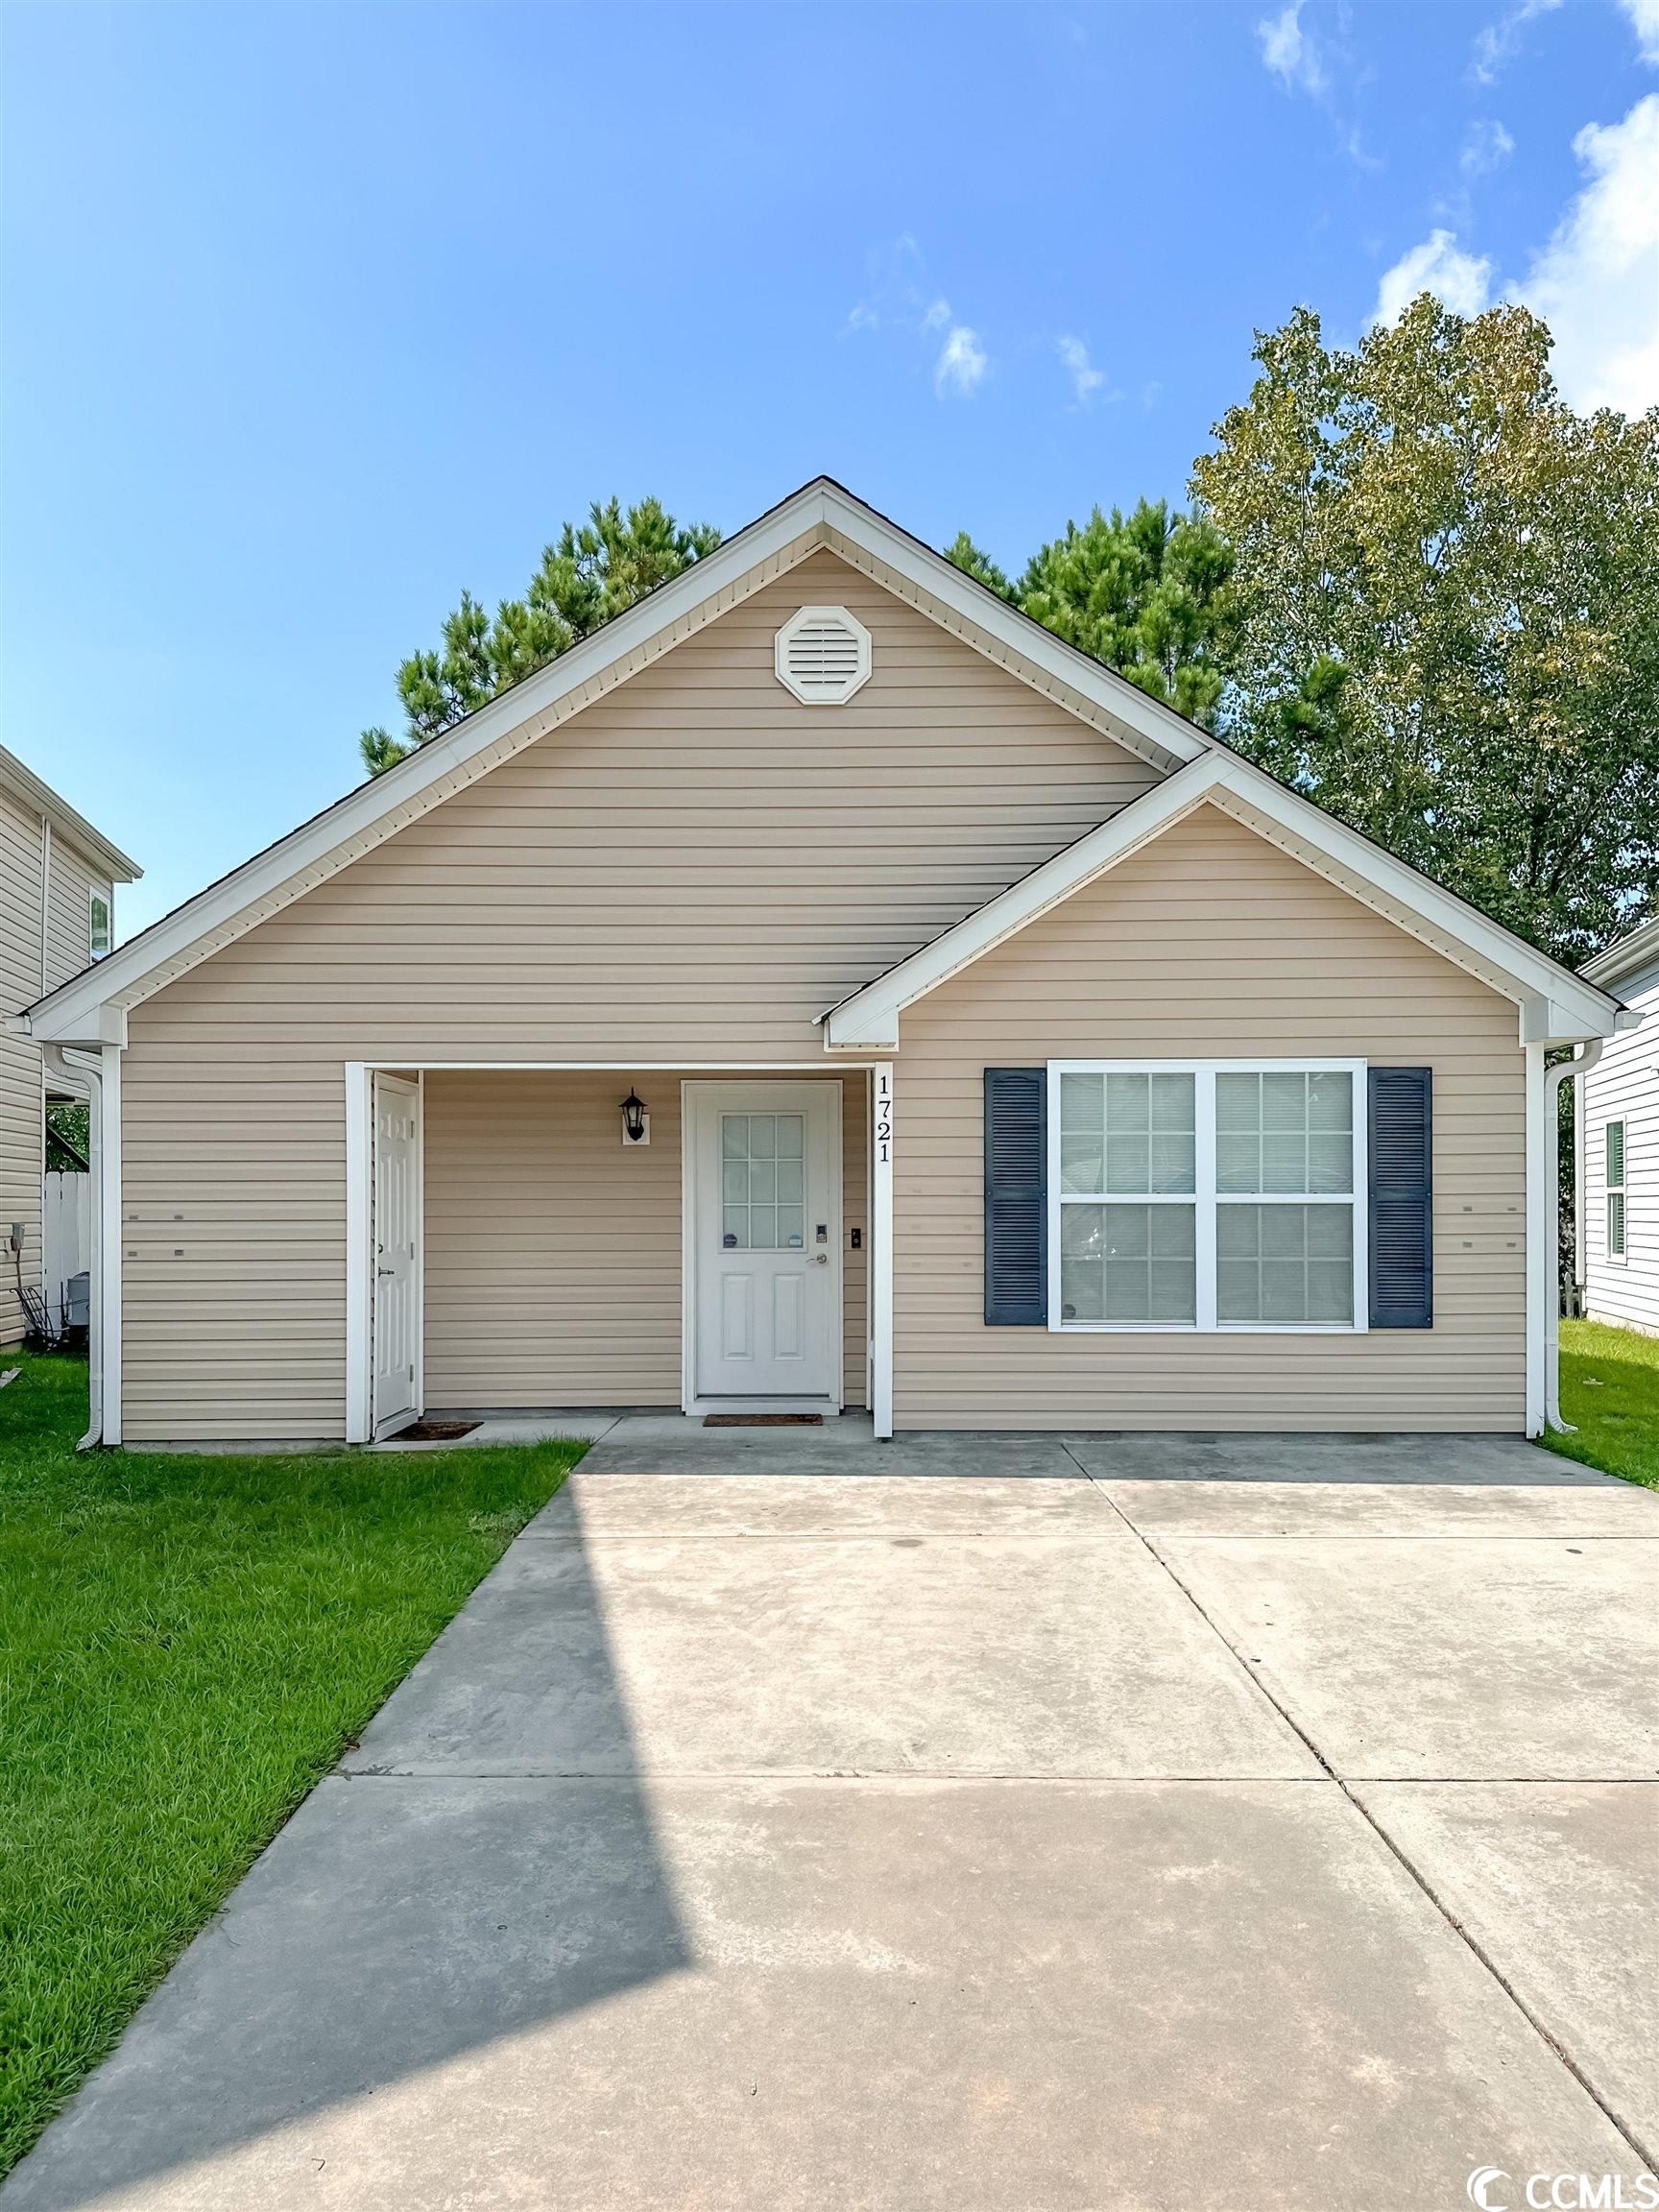 like new, 2 bed/2 bath, single family home in the heart of myrtle beach. this home features tile and carpet floors, ceiling fans, dishwasher, flat top stove, microwave, disposal, refrigerator, and washer and dryer. new hvac installed in february 2022. only used as a second home since it was purchase brand new. the low hoa fees include the lawn maintenance. square footage is approximate and not guaranteed. buyer is responsible for verification.